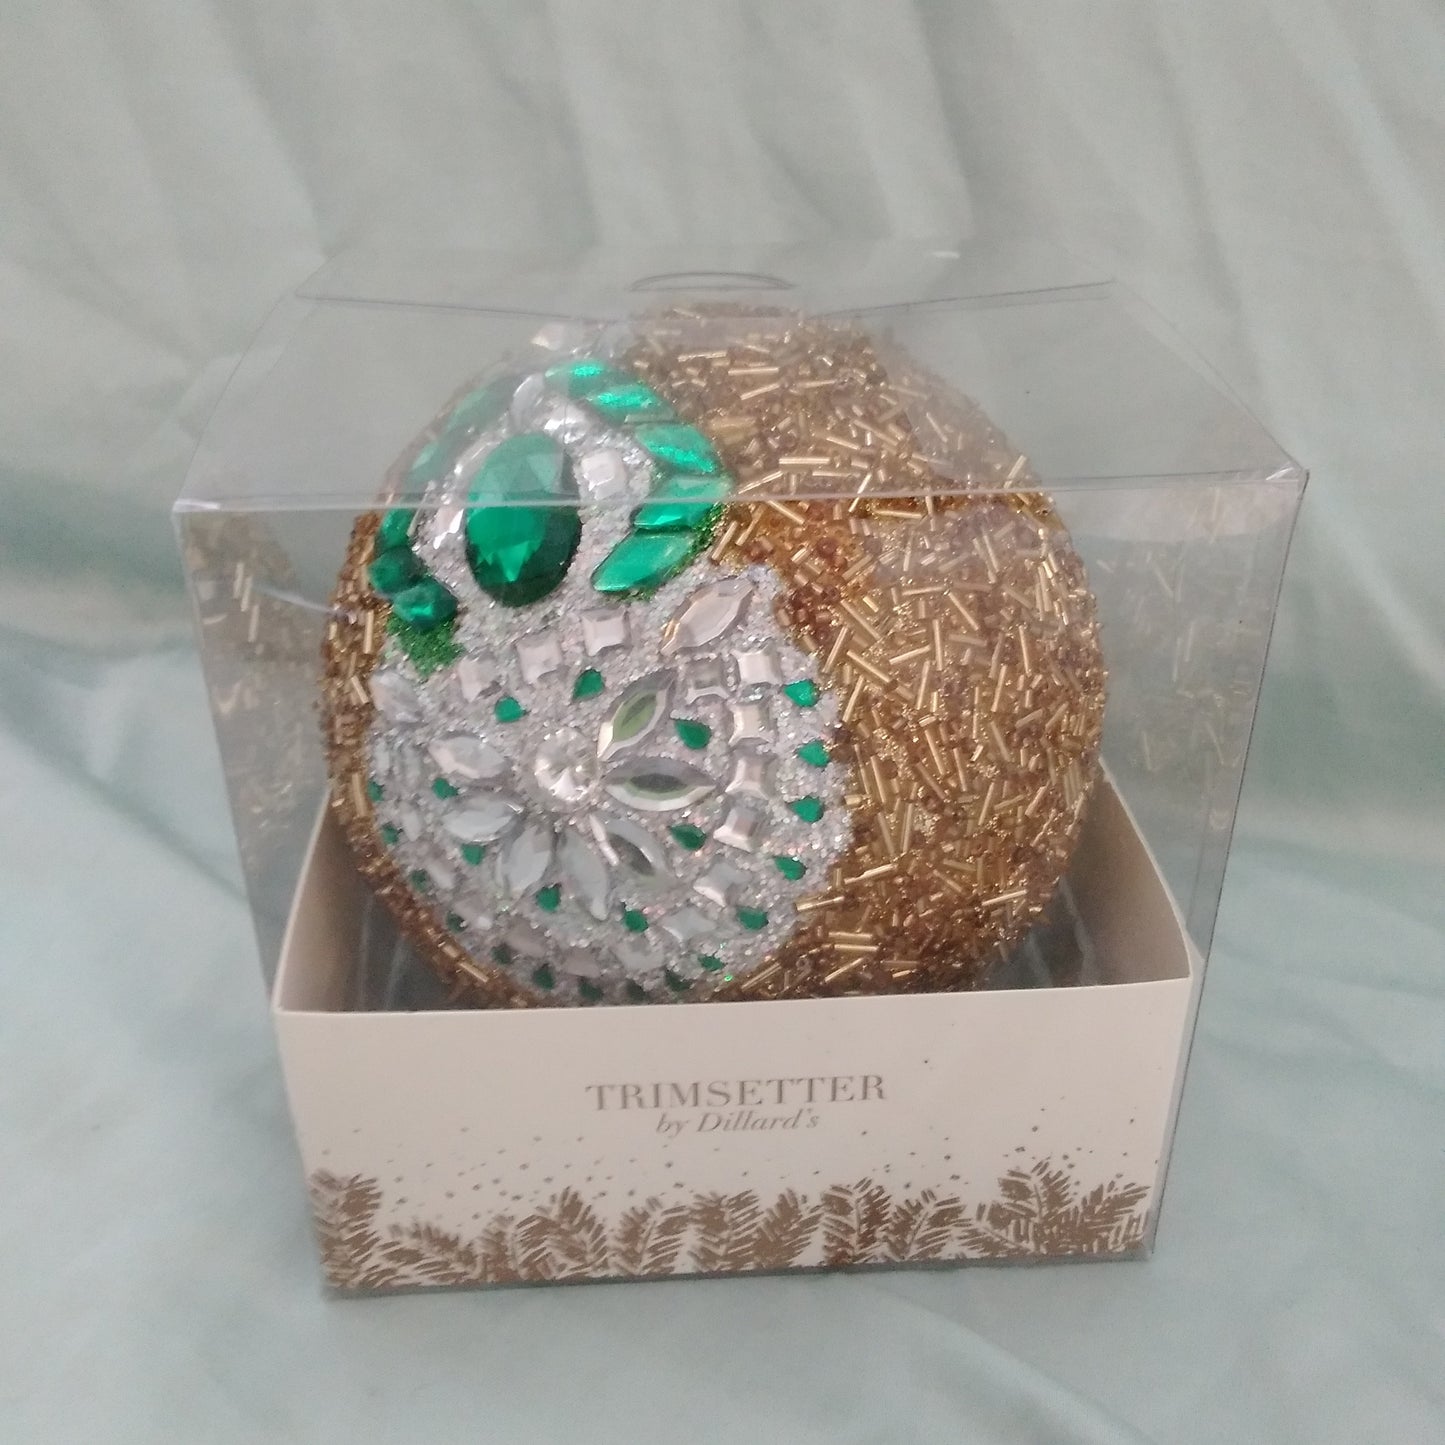 Trimsetter by Dillard's Large Gold Ornament with White and Green Crystal Snowman